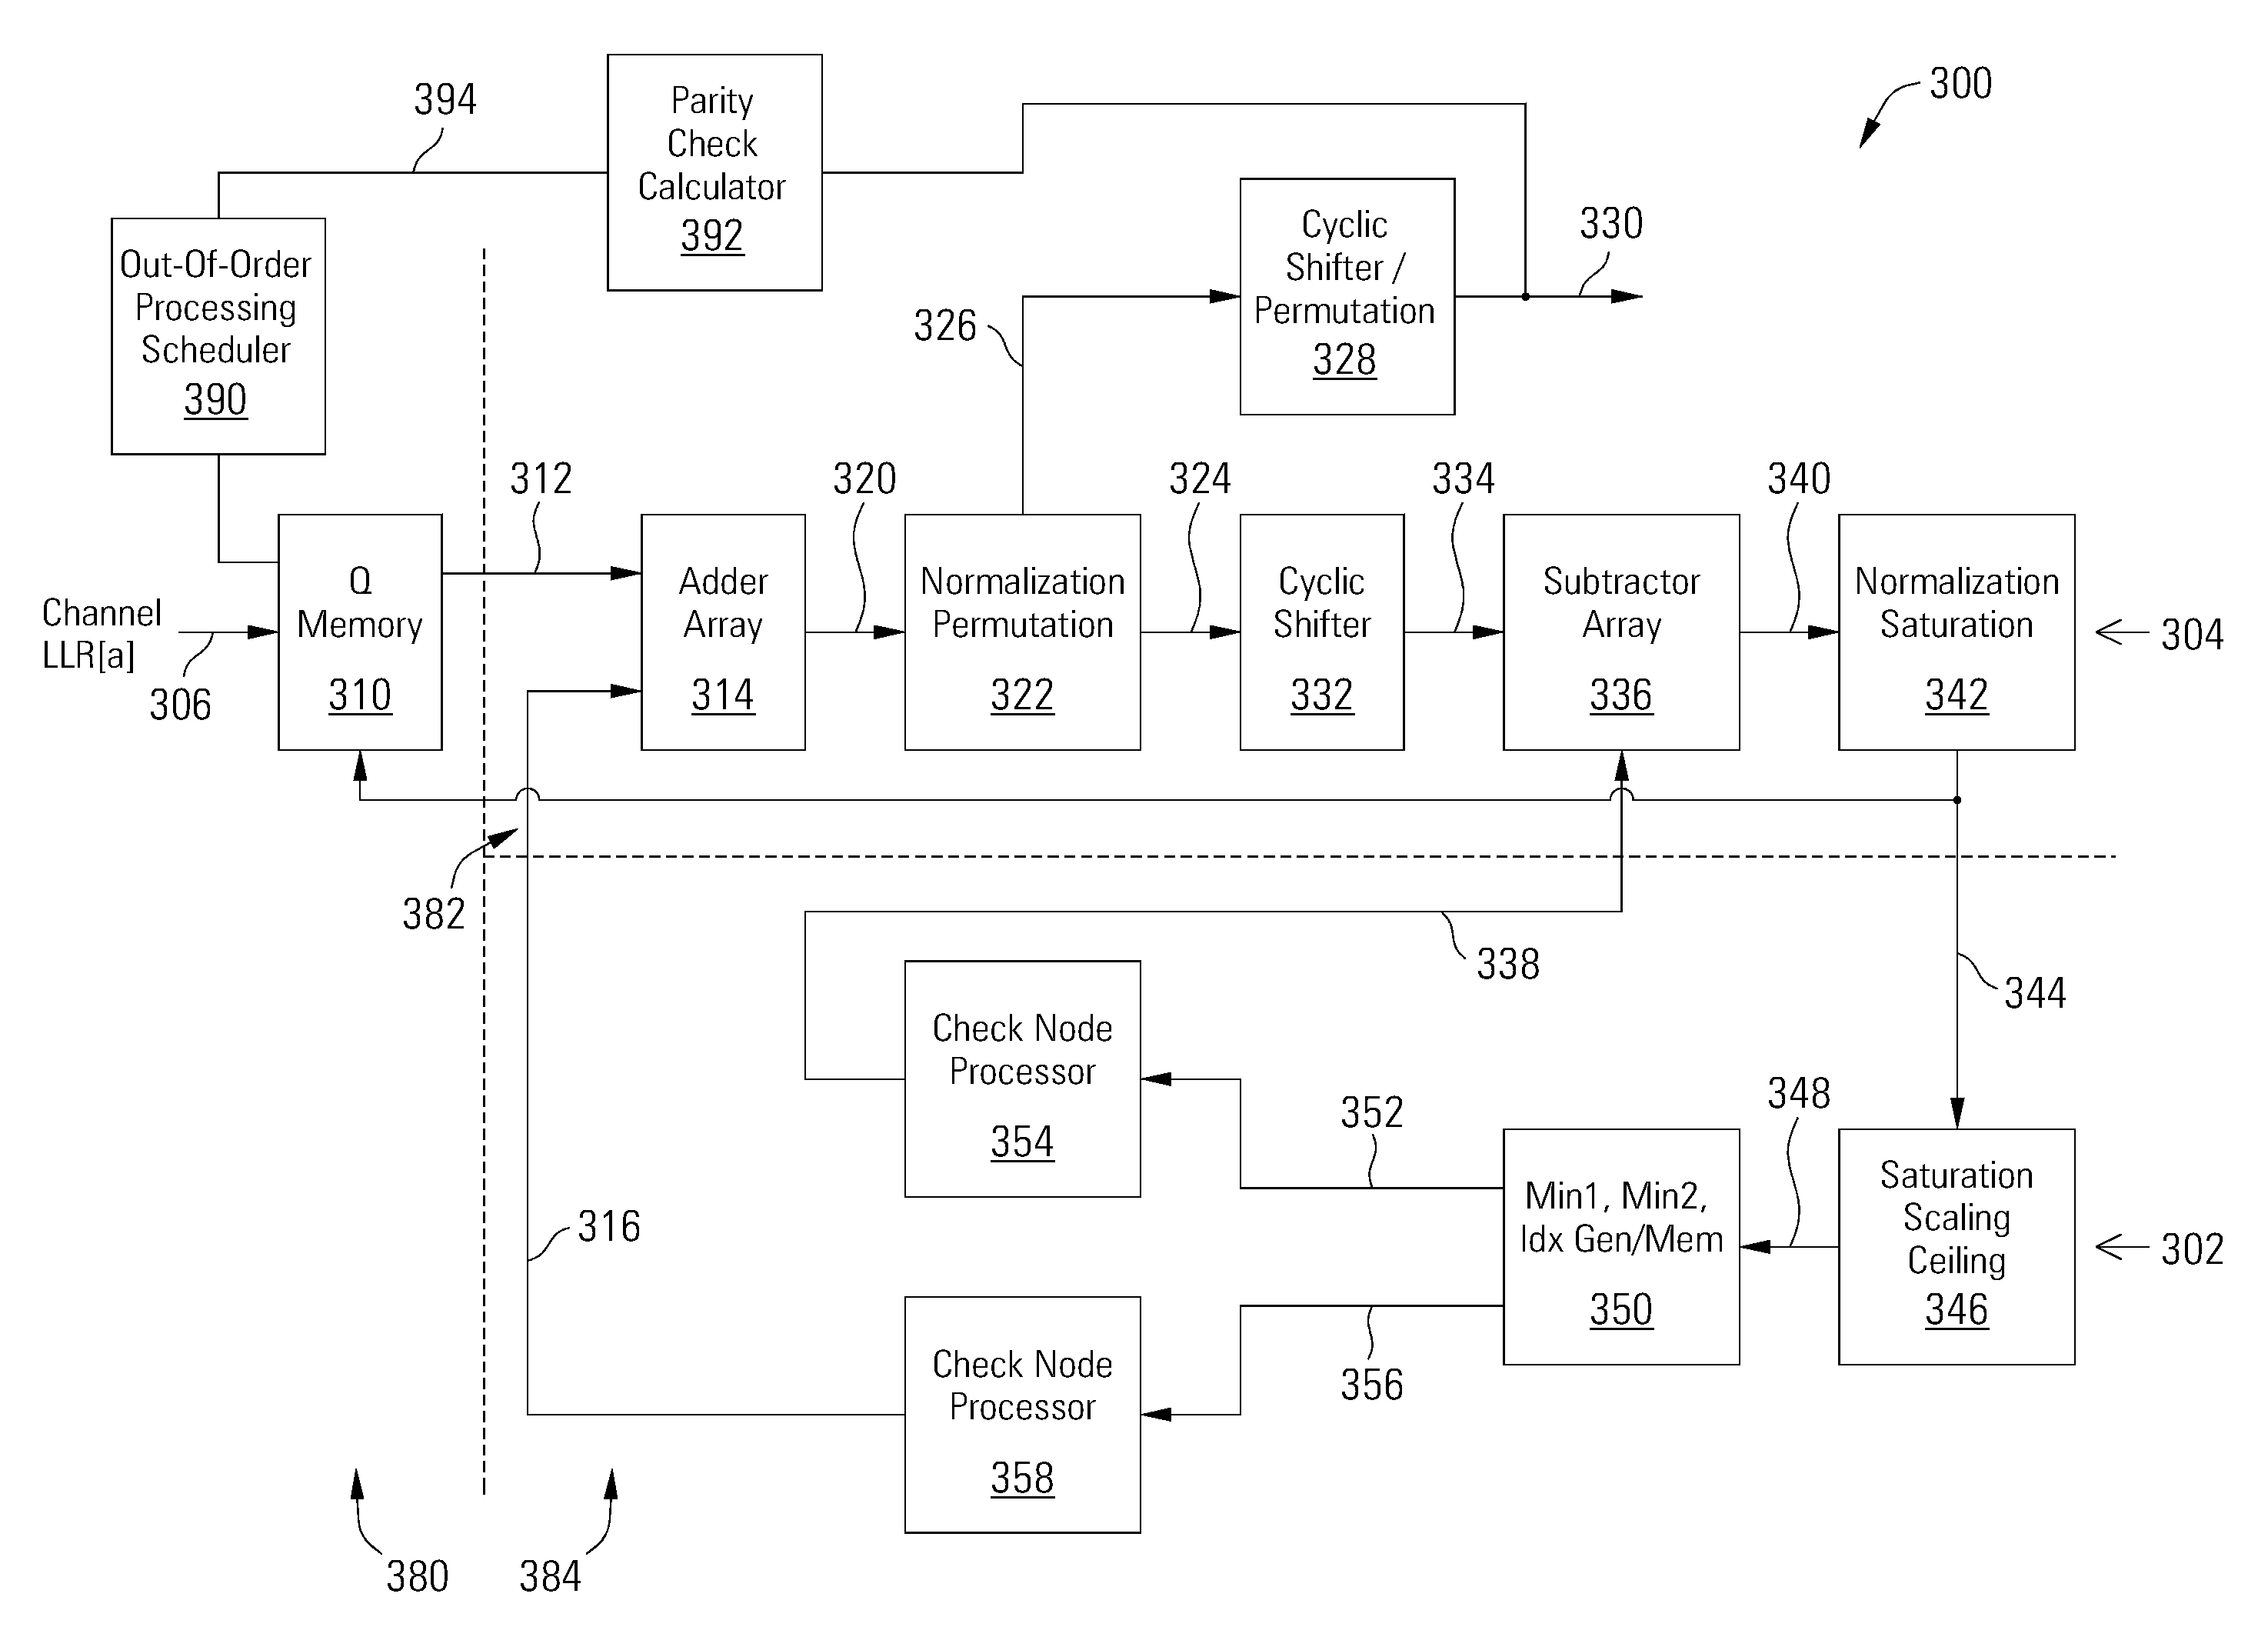 Multi-level LDPC layered decoder with out-of-order processing